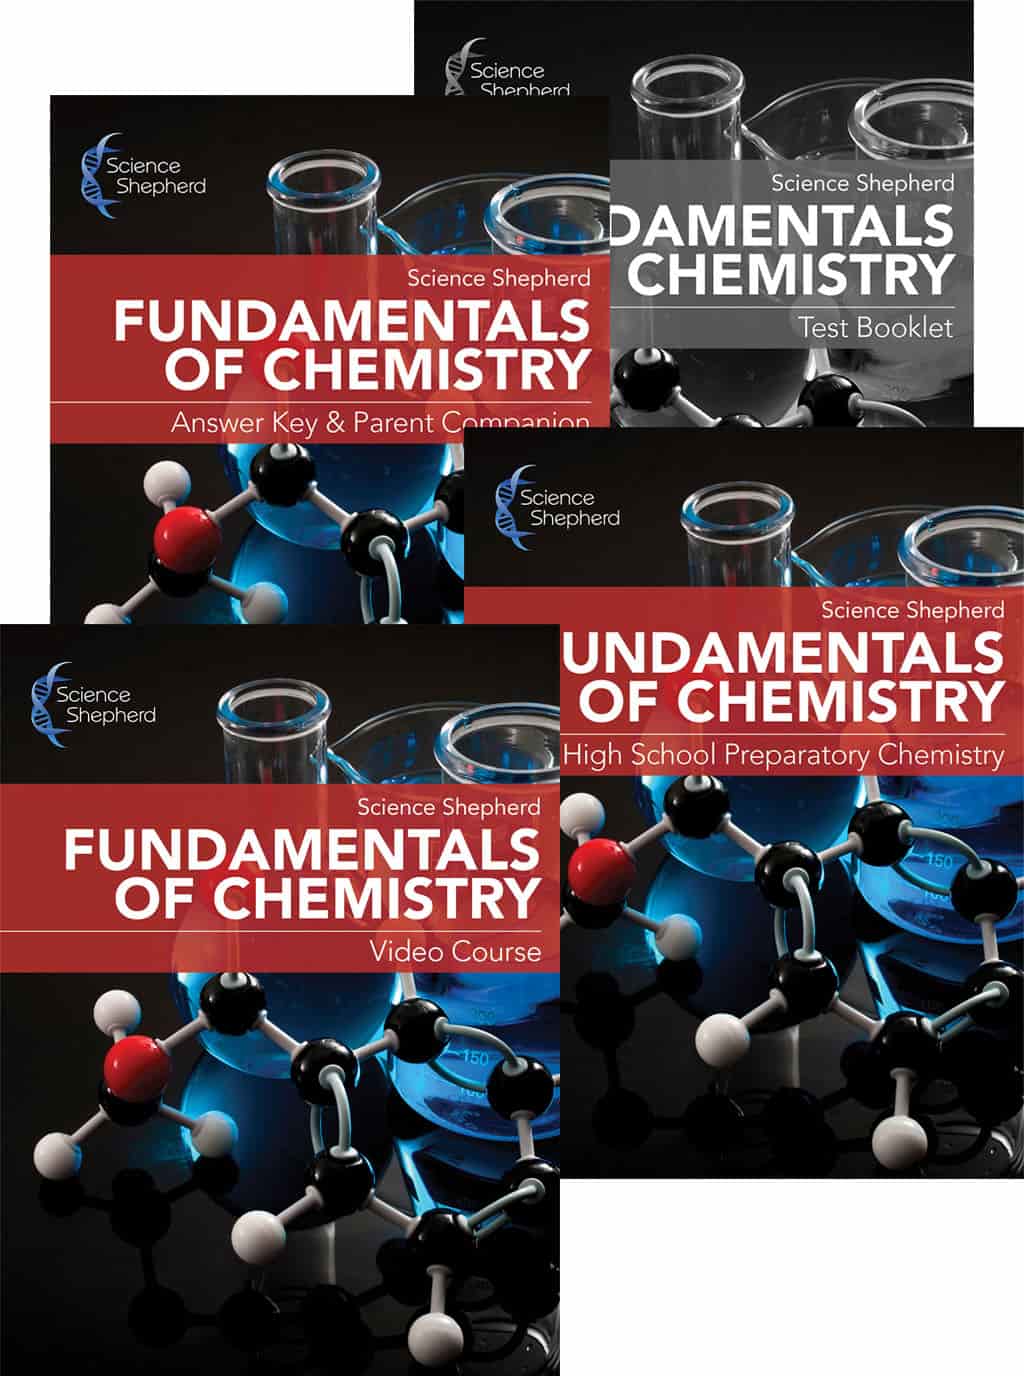 Fundamentals of Chemistry homeschool videos with 3-book set cover